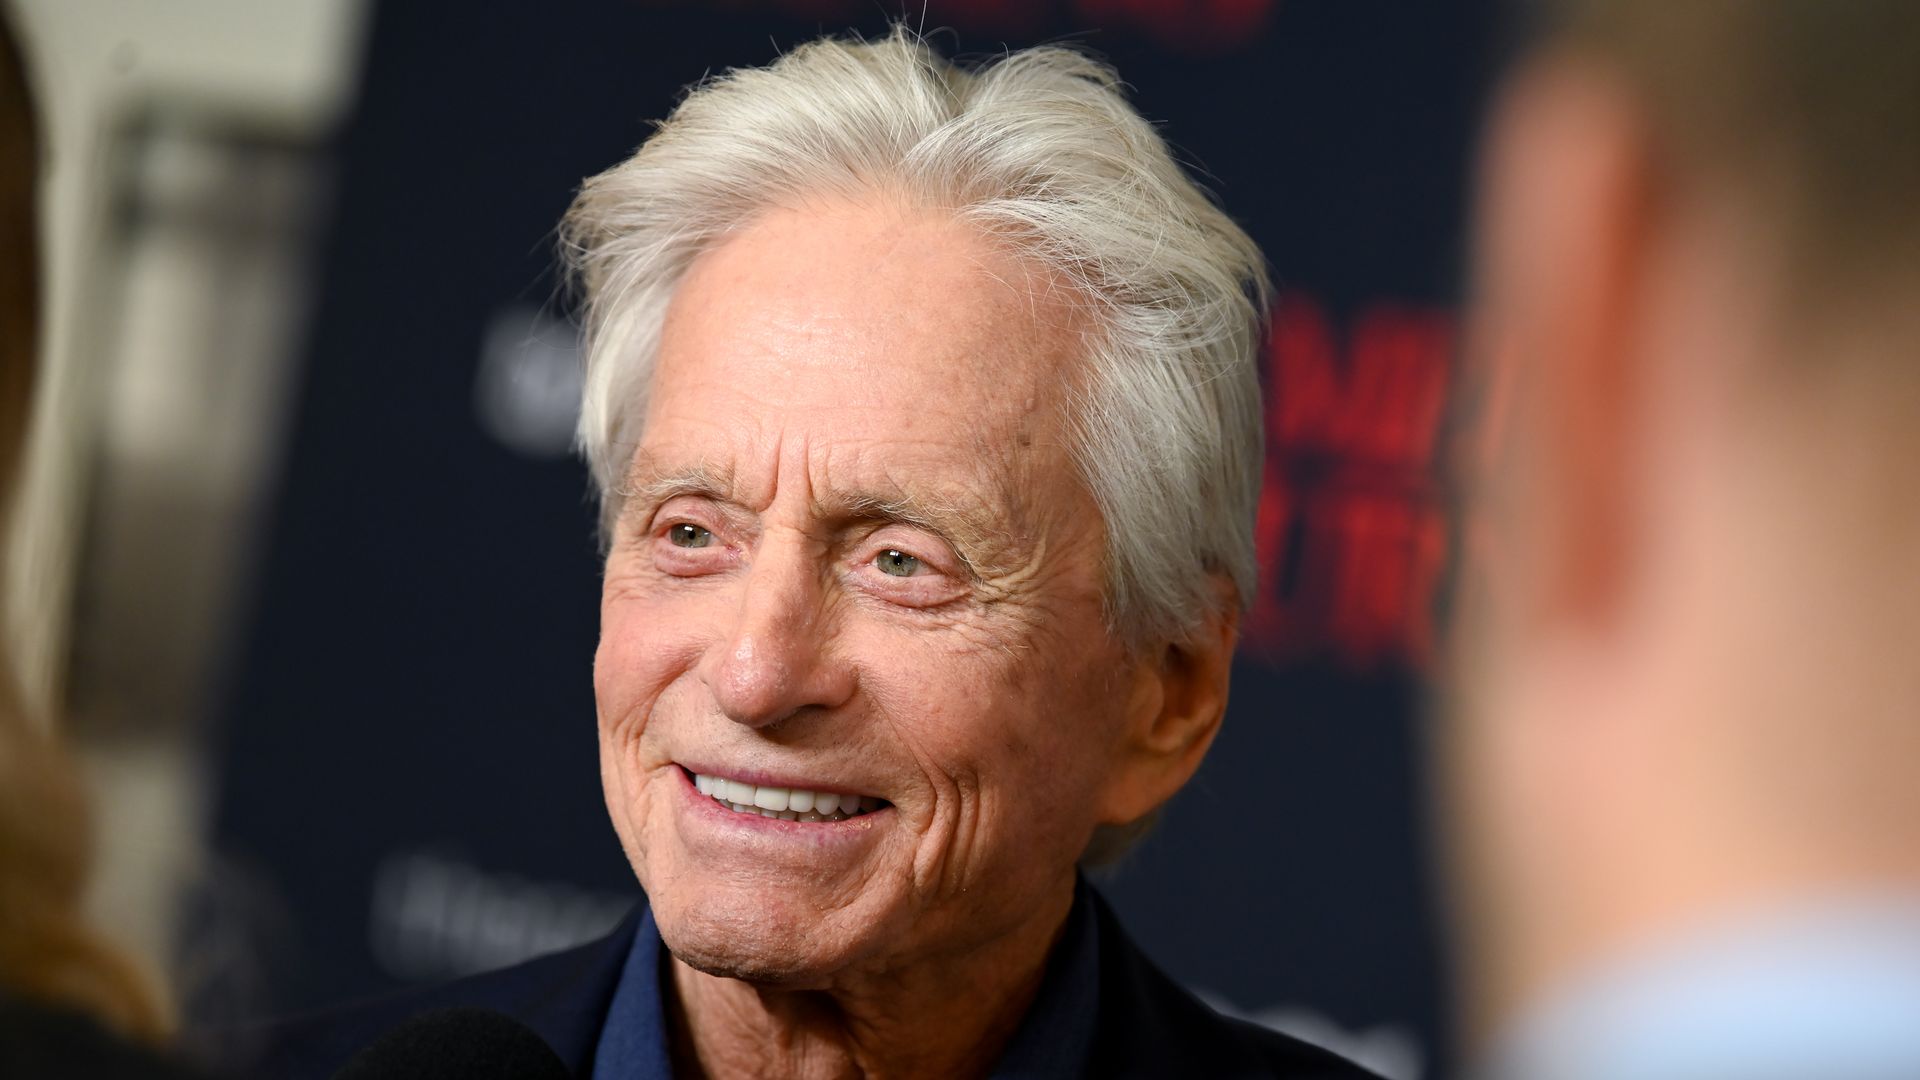 Meet Michael Douglas' three famous lookalike brothers Joel, Peter, and Eric — the family in photos